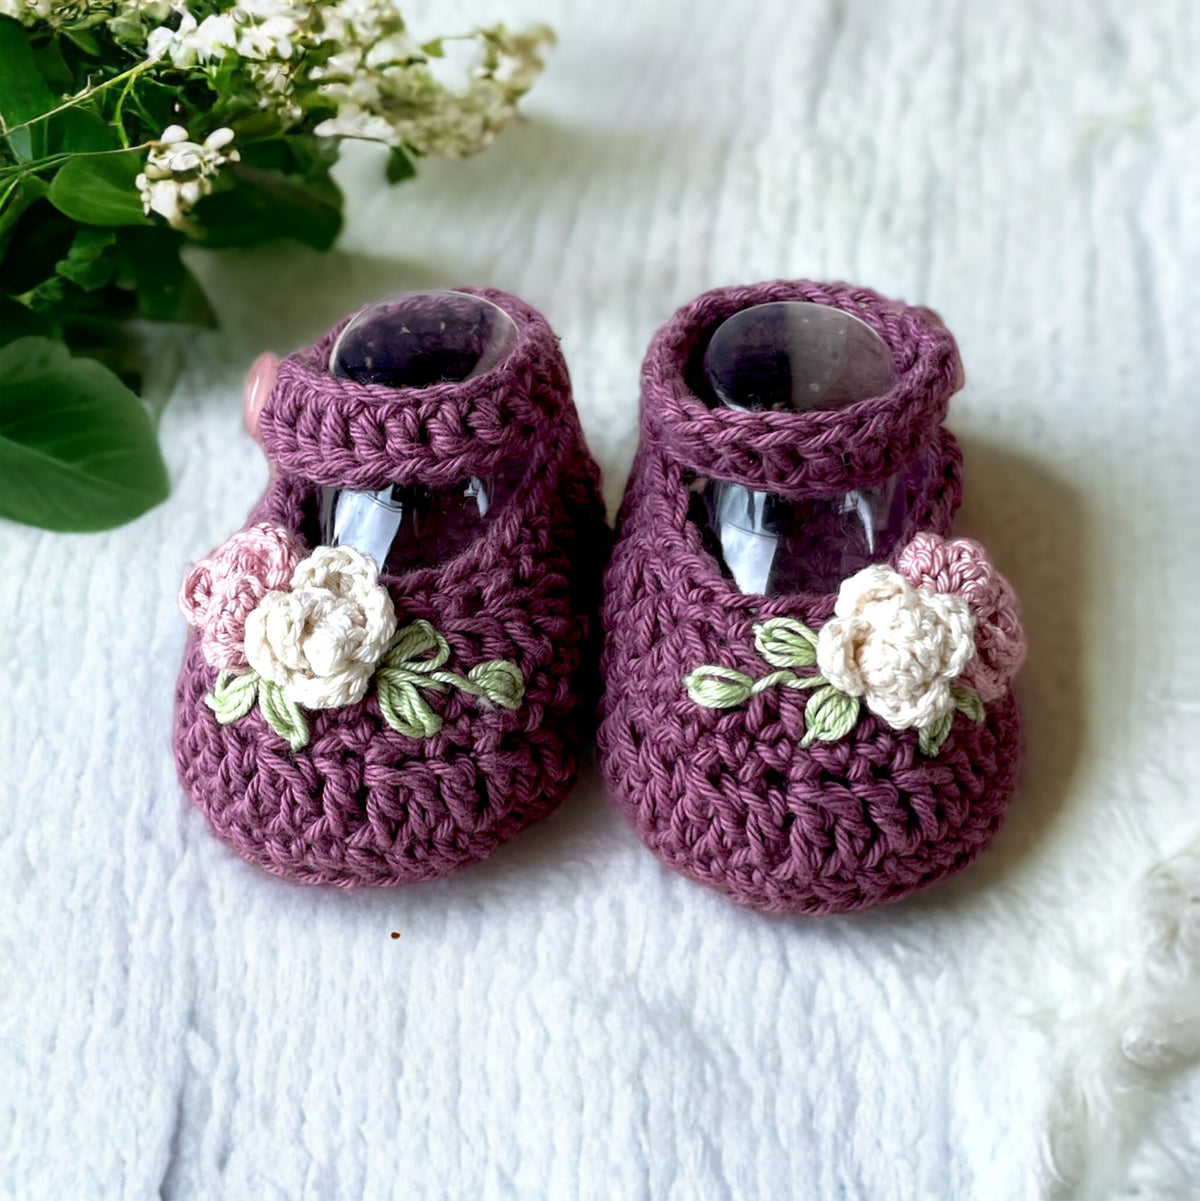 Crochet baby booties, Mary Jane rose shoes